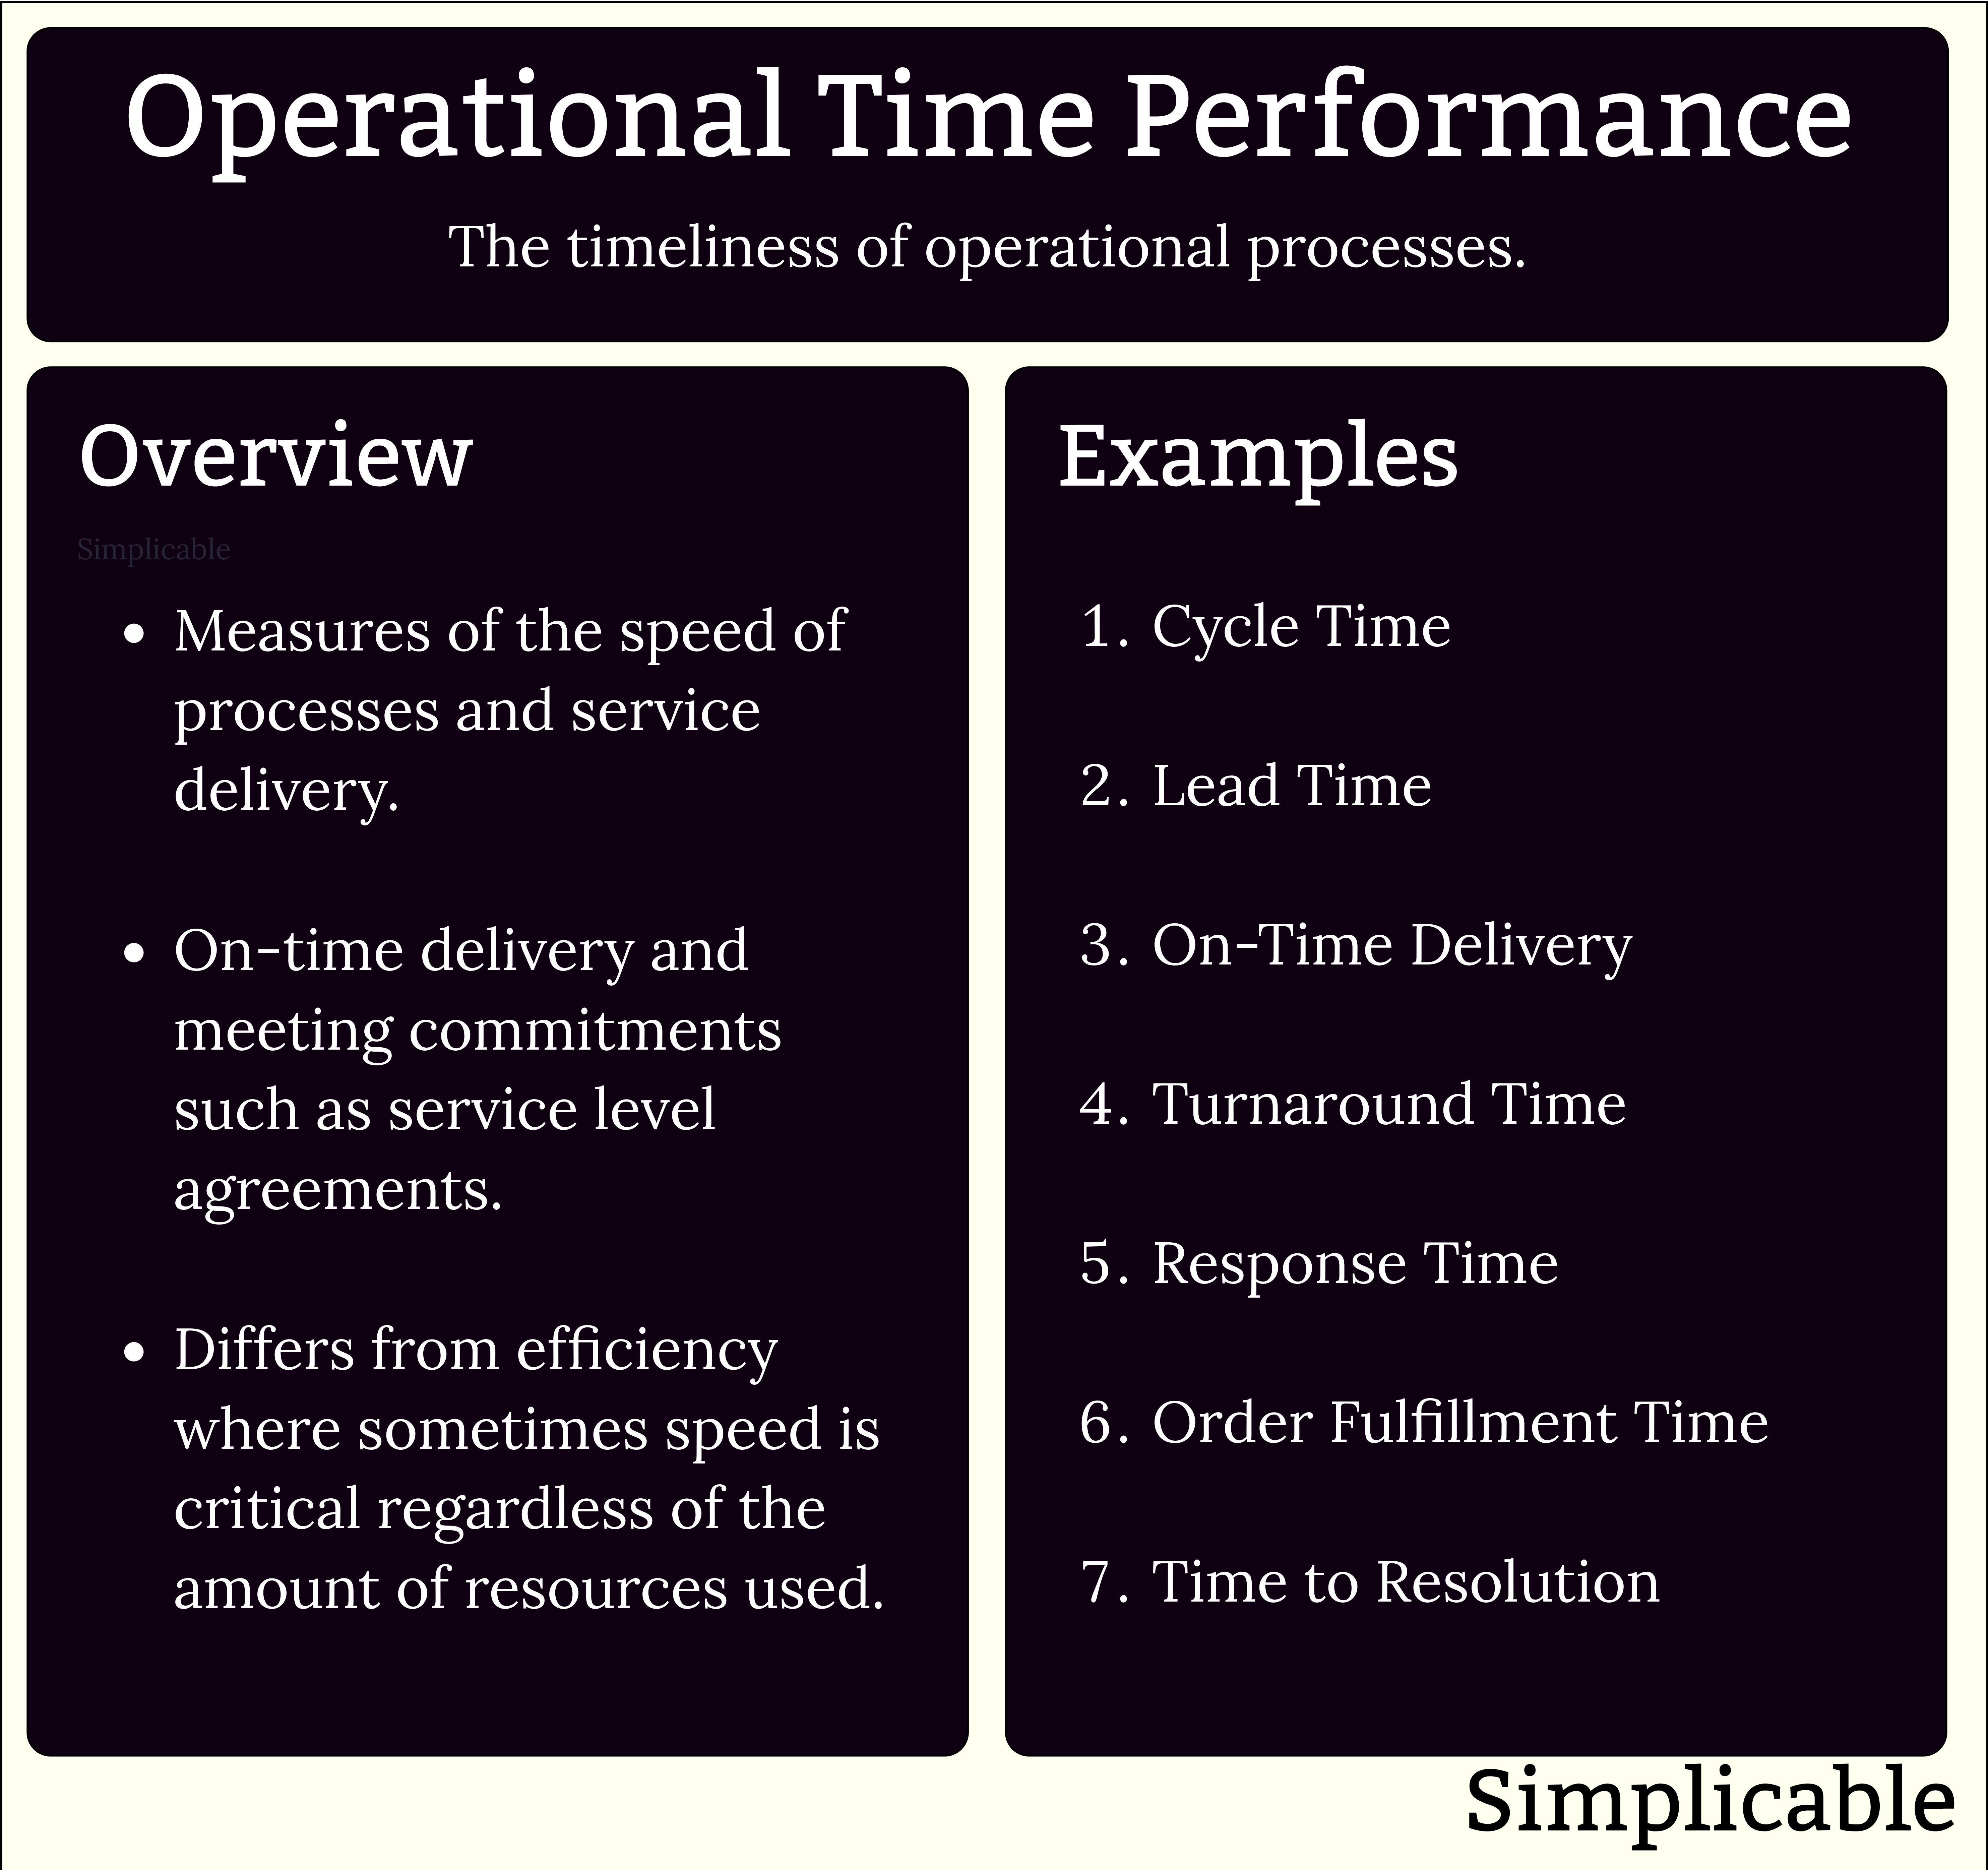 operational time performance summary and examples